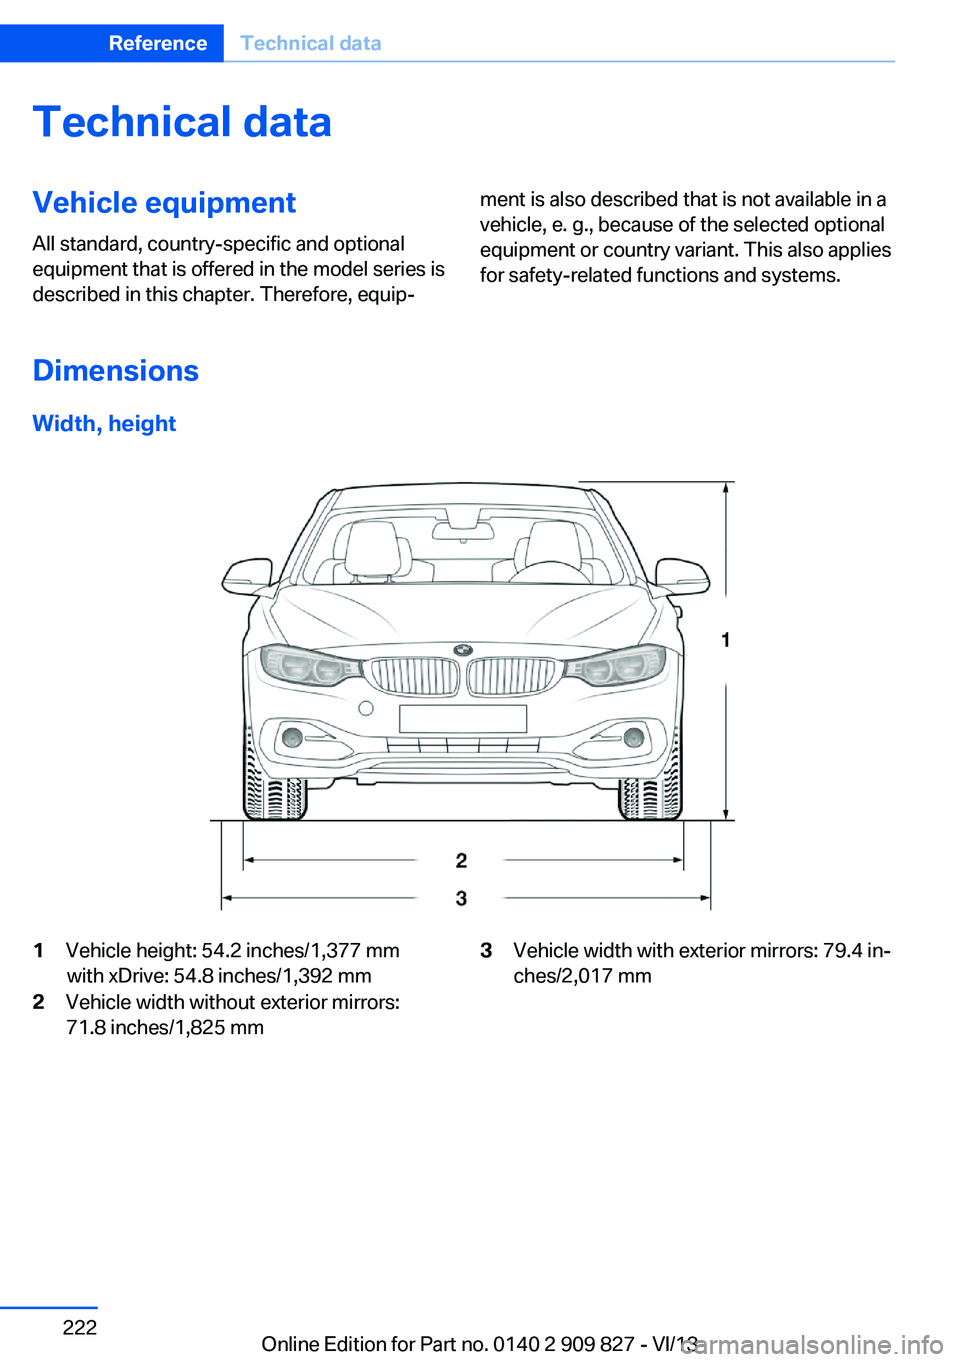 BMW 428I XDRIVE COUPE 2014  Owners Manual Technical dataVehicle equipment
All standard, country-specific and optional
equipment that is offered in the model series is
described in this chapter. Therefore, equip‐
ment is also described that 